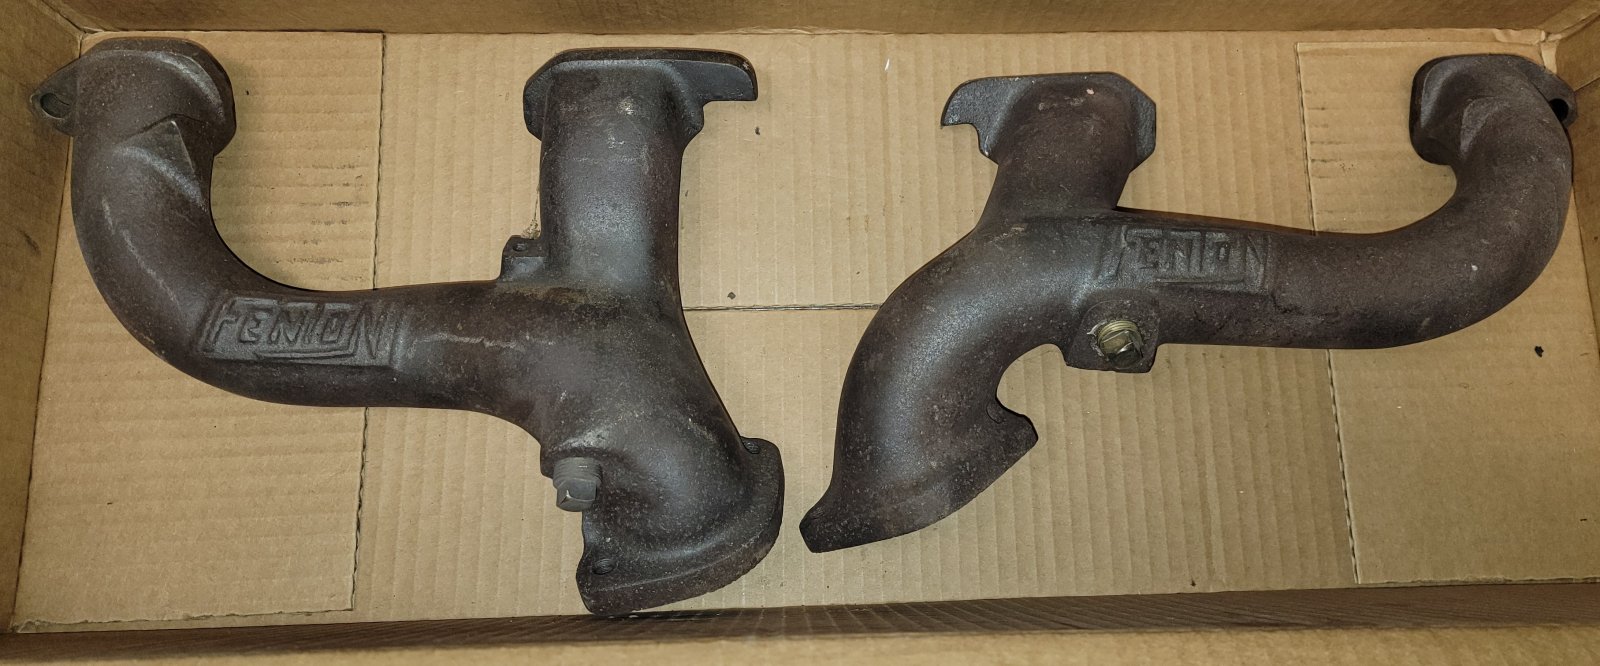 SOLD 1937-59 Fenton Headers 216-235 6 Cylinder & Intake Manifold | The ...